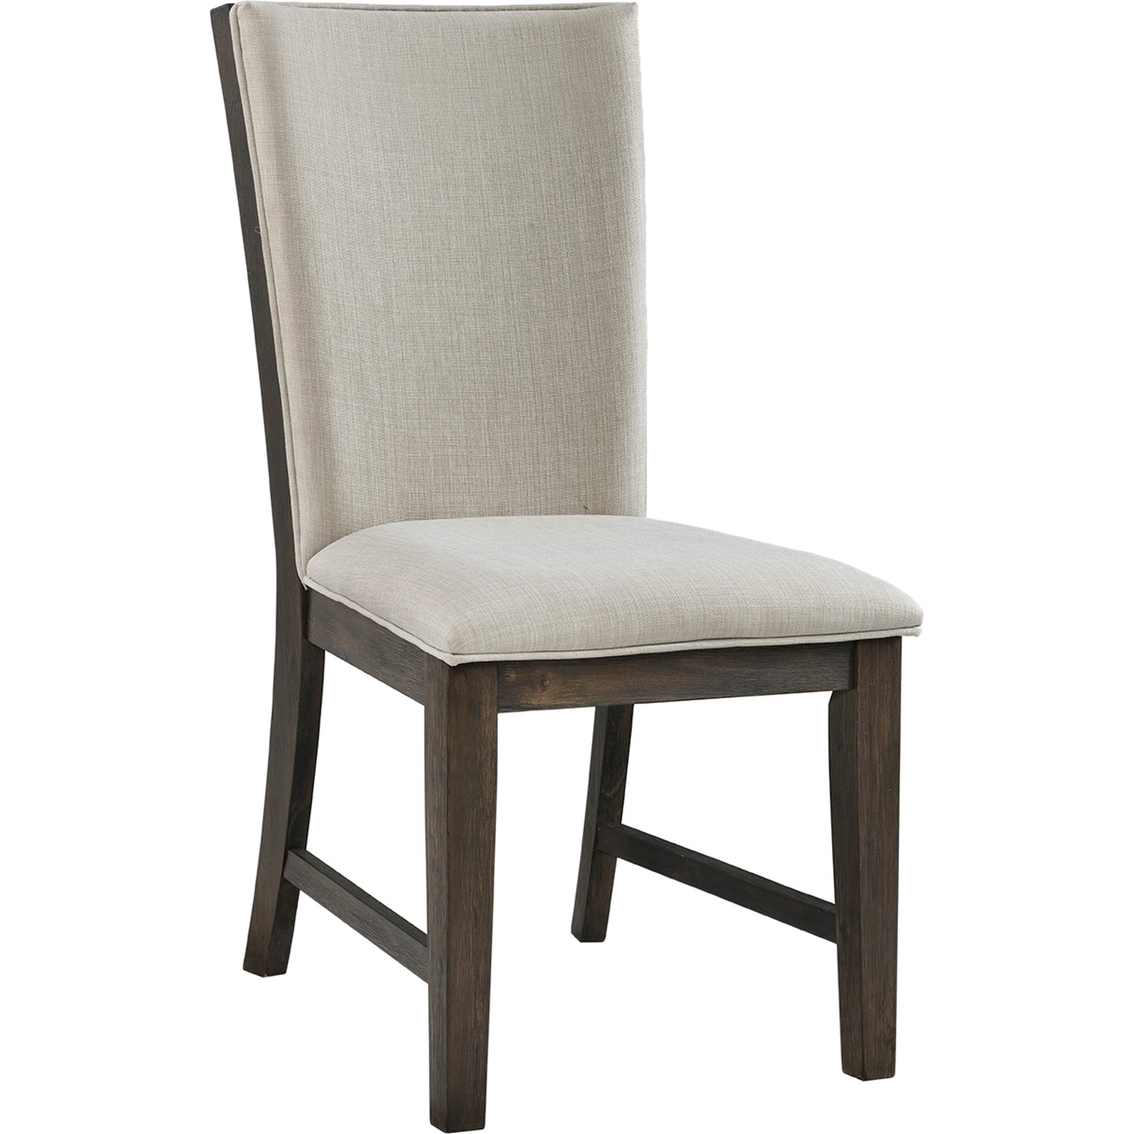 Elements Grady 7 pc. Dining Set with Upholstered Chairs - Image 3 of 8